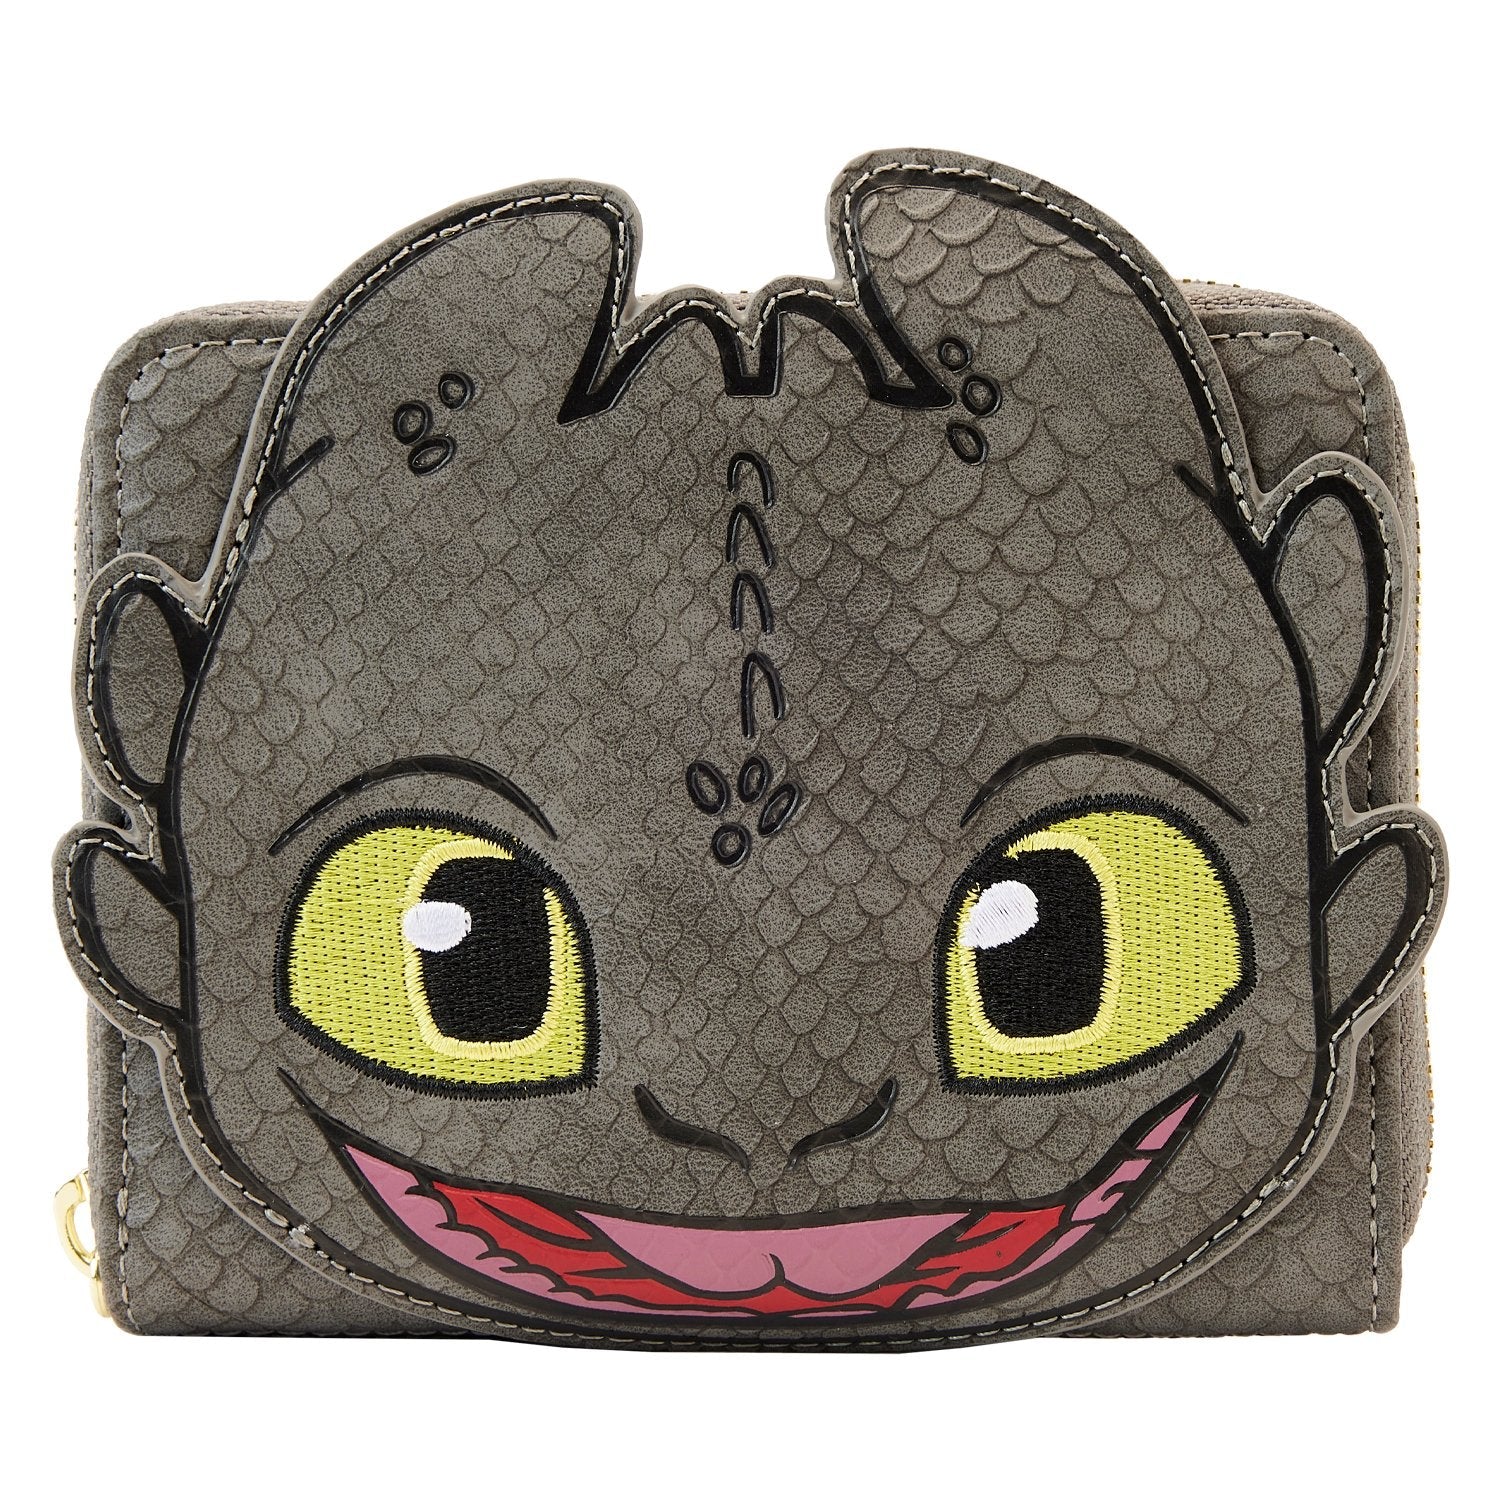 Dreamworks How to Train Your Dragon Toothless Cosplay Zip Around Wallet - Loungefly - 1